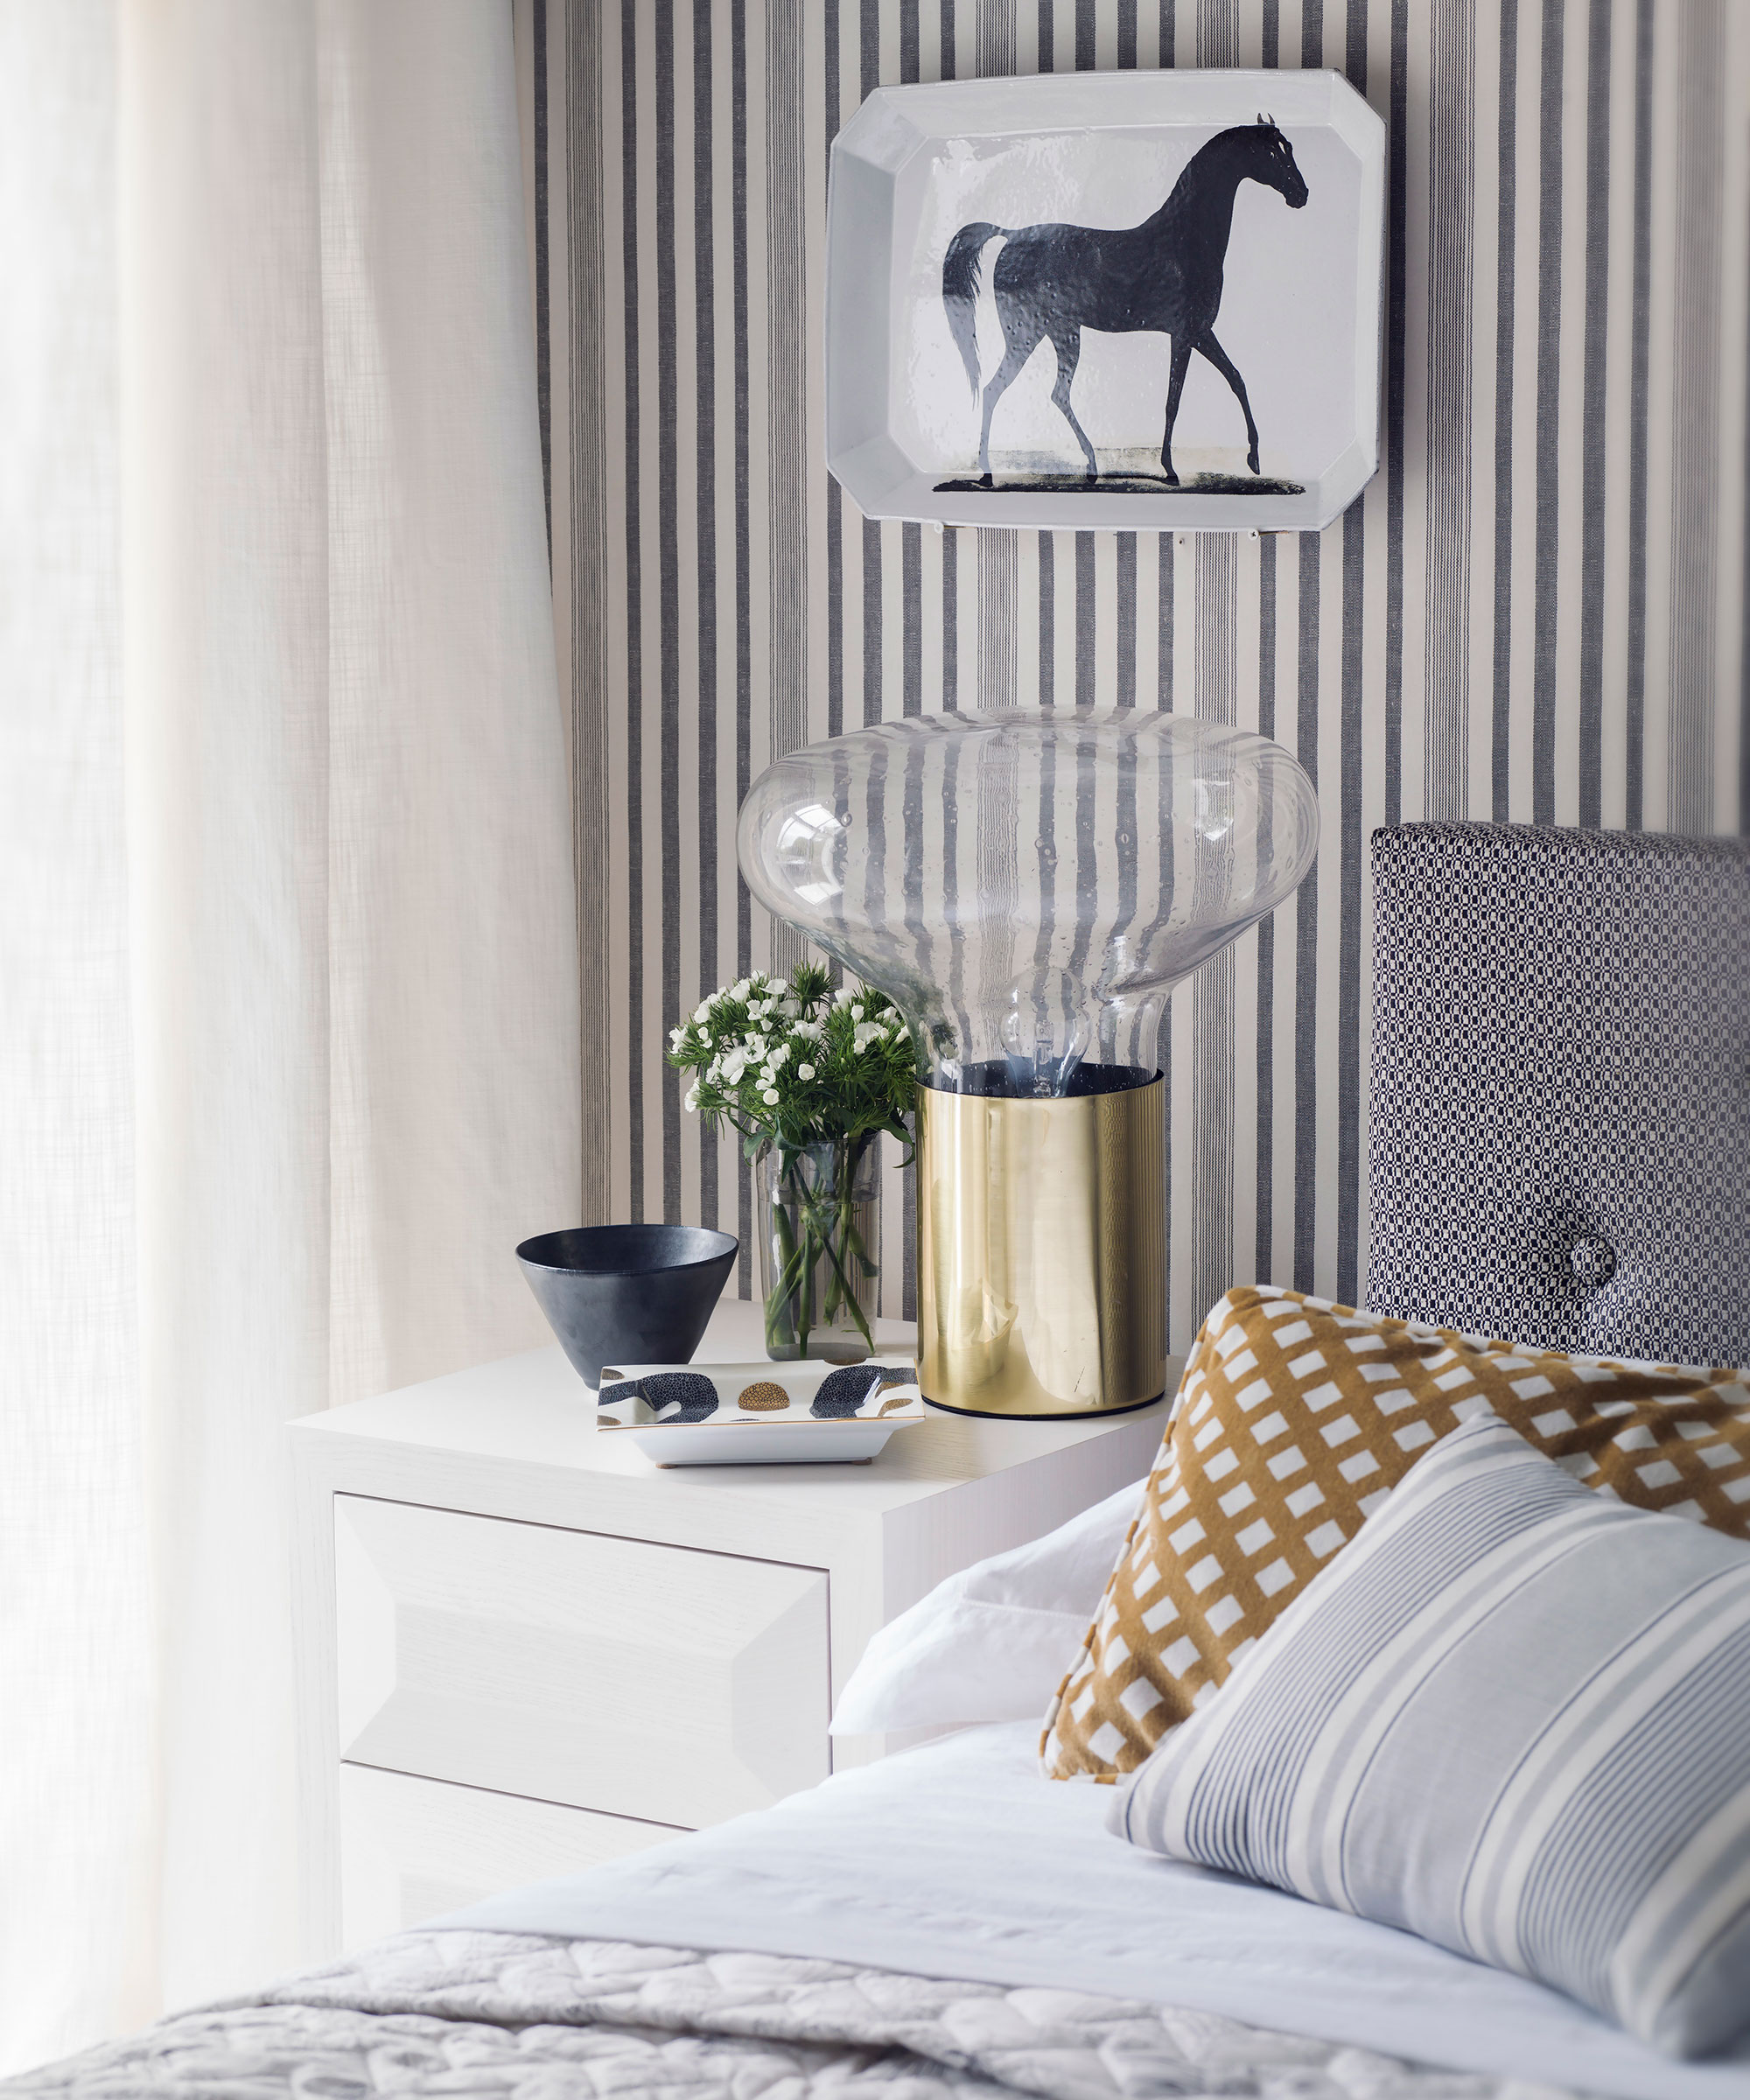 An example of bedroom lighting ideas showing an oversized glass and gold table lamp in front of striped wallpaper